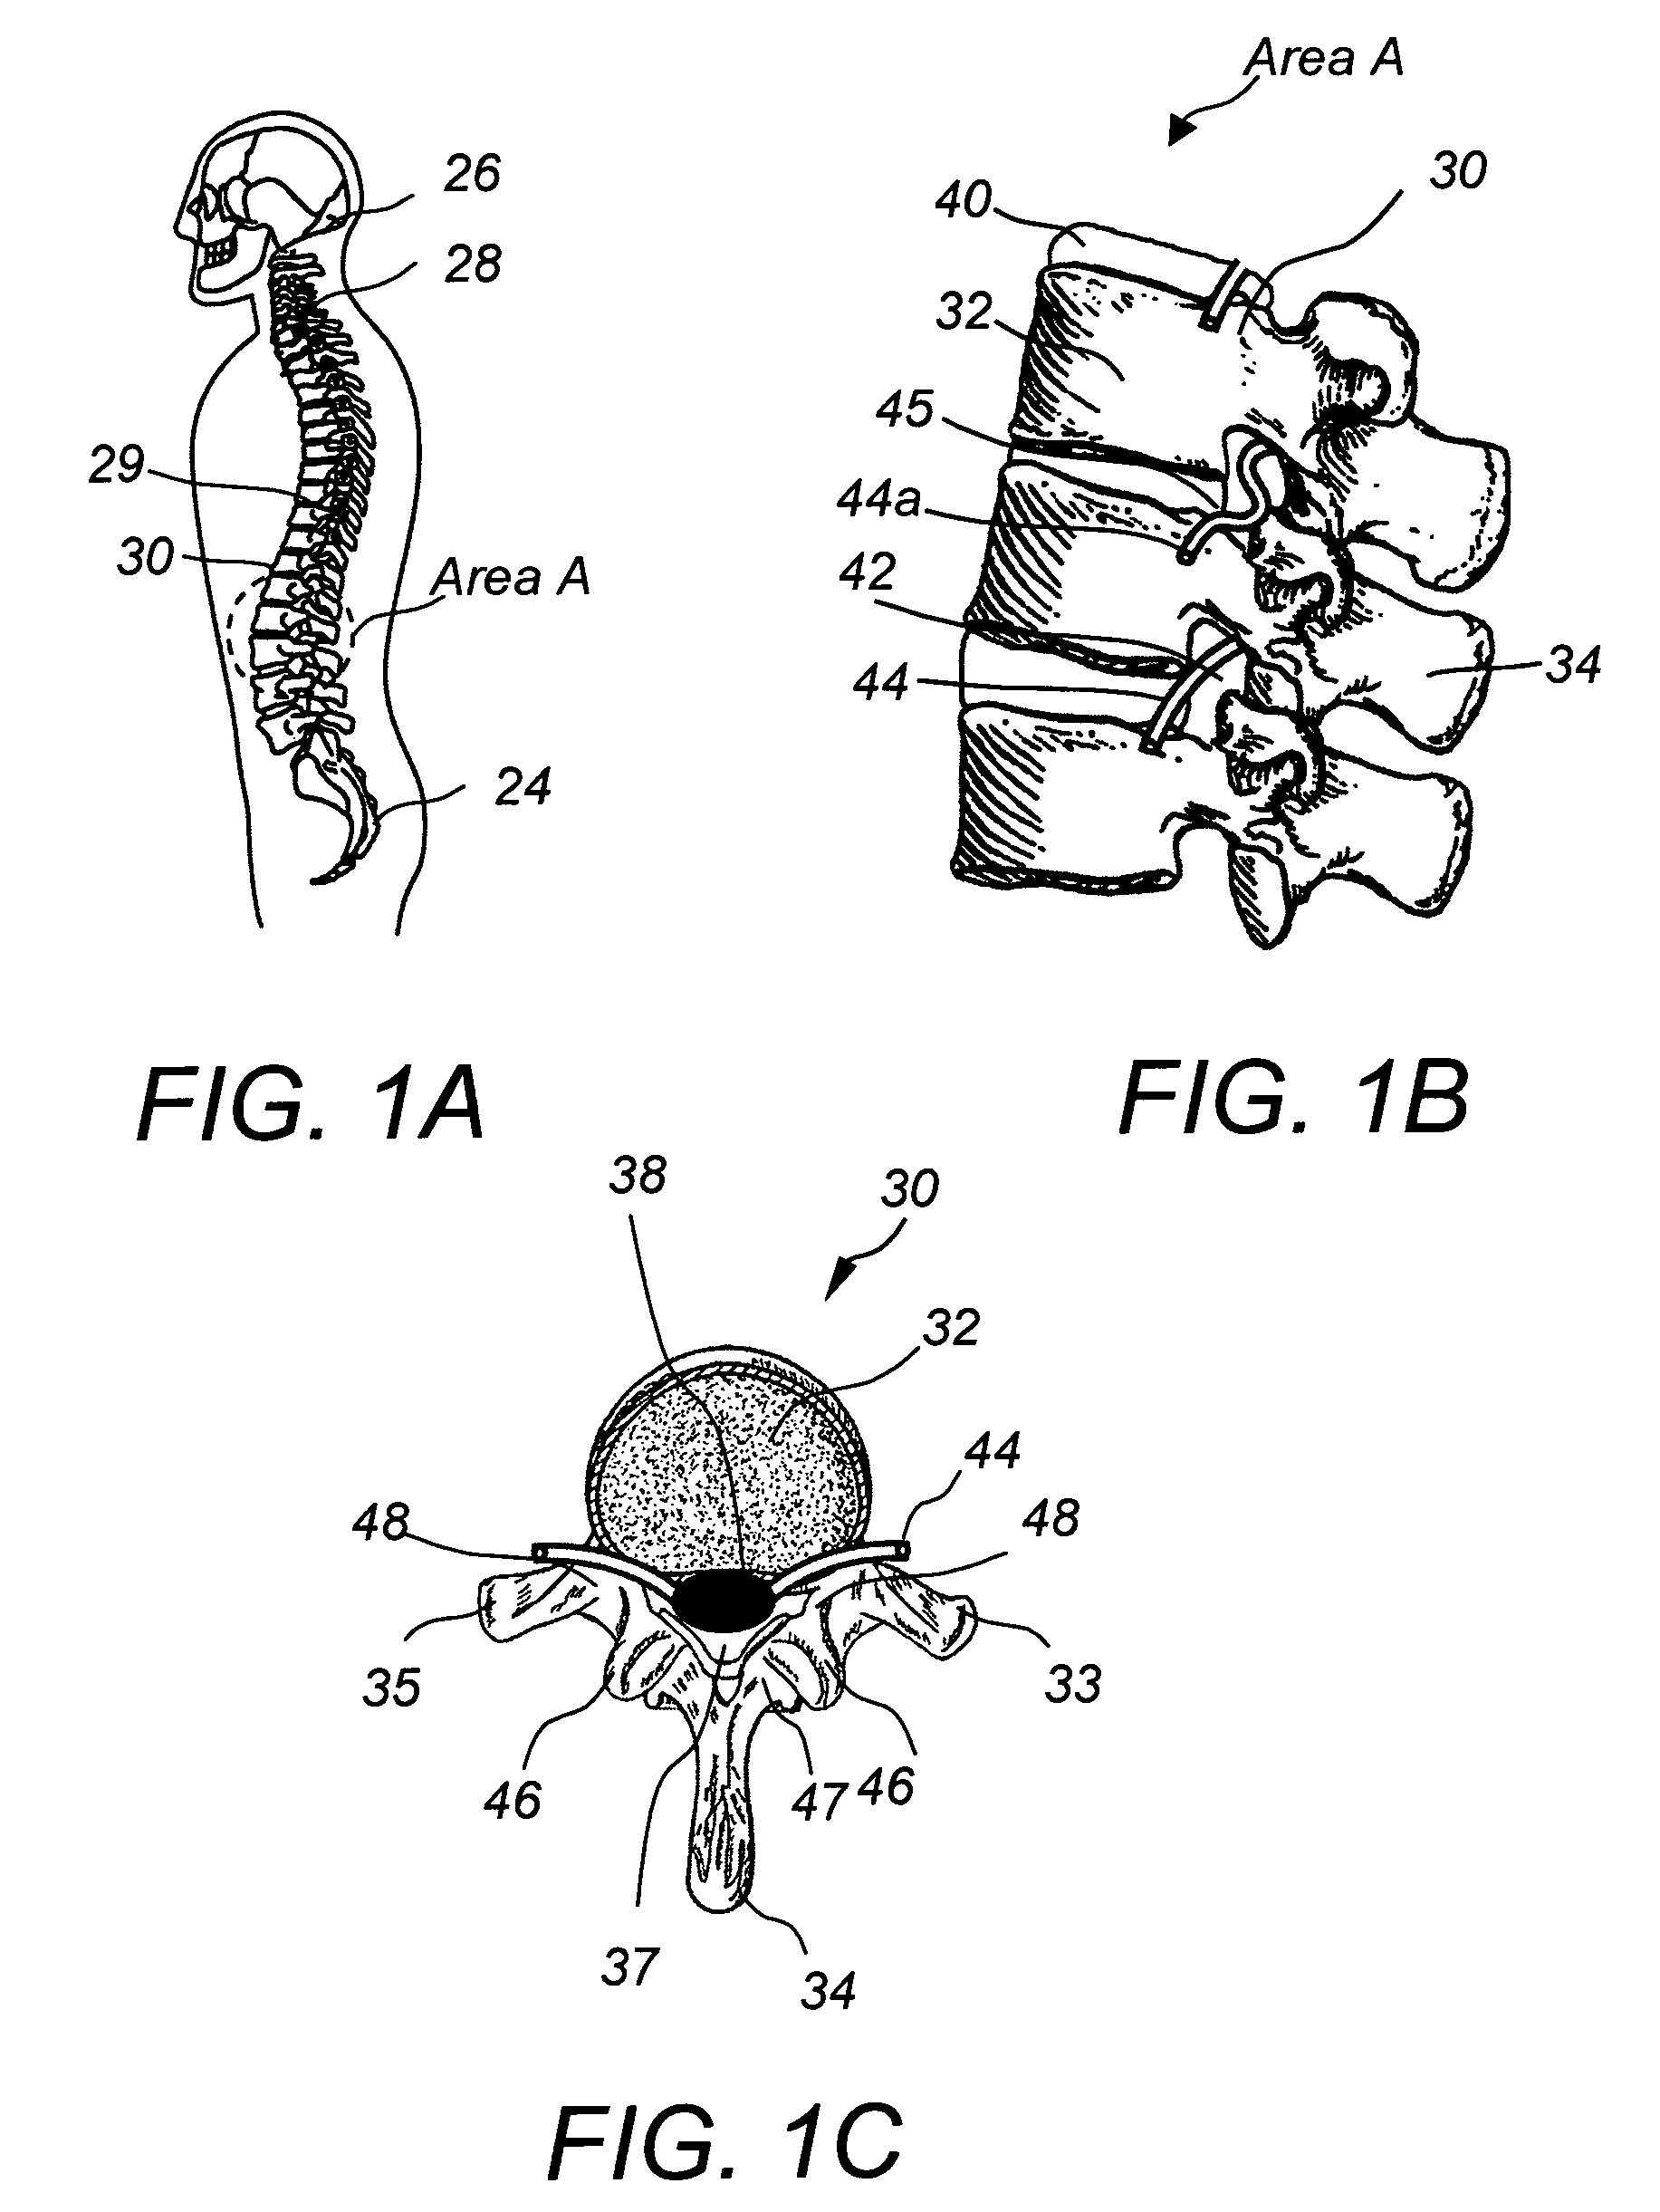 Apparatus and method for connecting spinal vertebrae